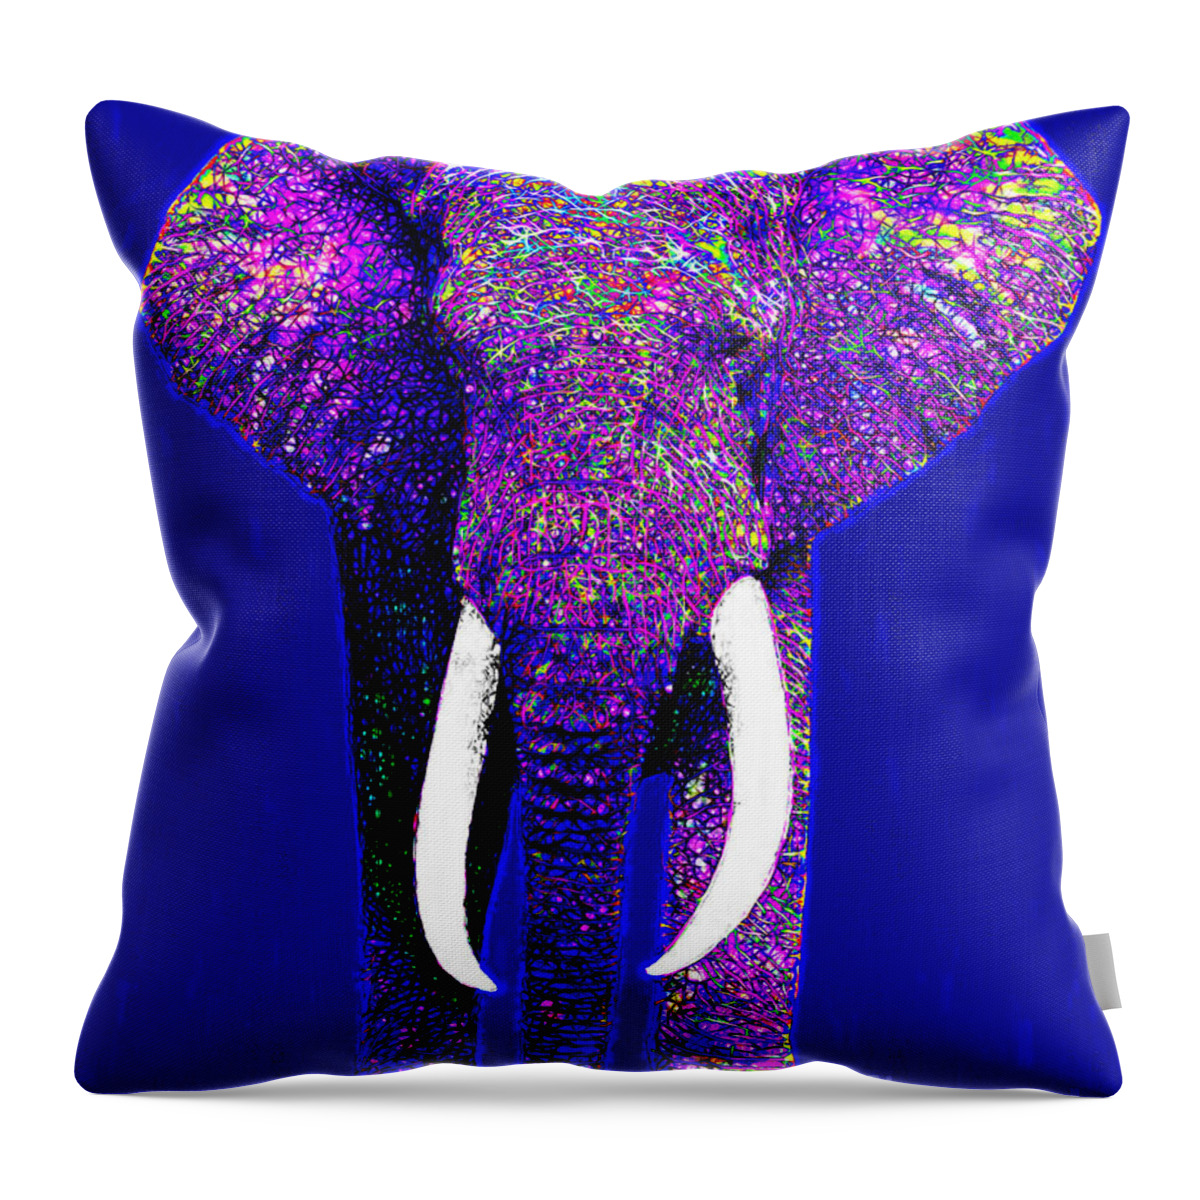 Elephant Throw Pillow featuring the photograph Big Elephant 20130201m118 by Wingsdomain Art and Photography